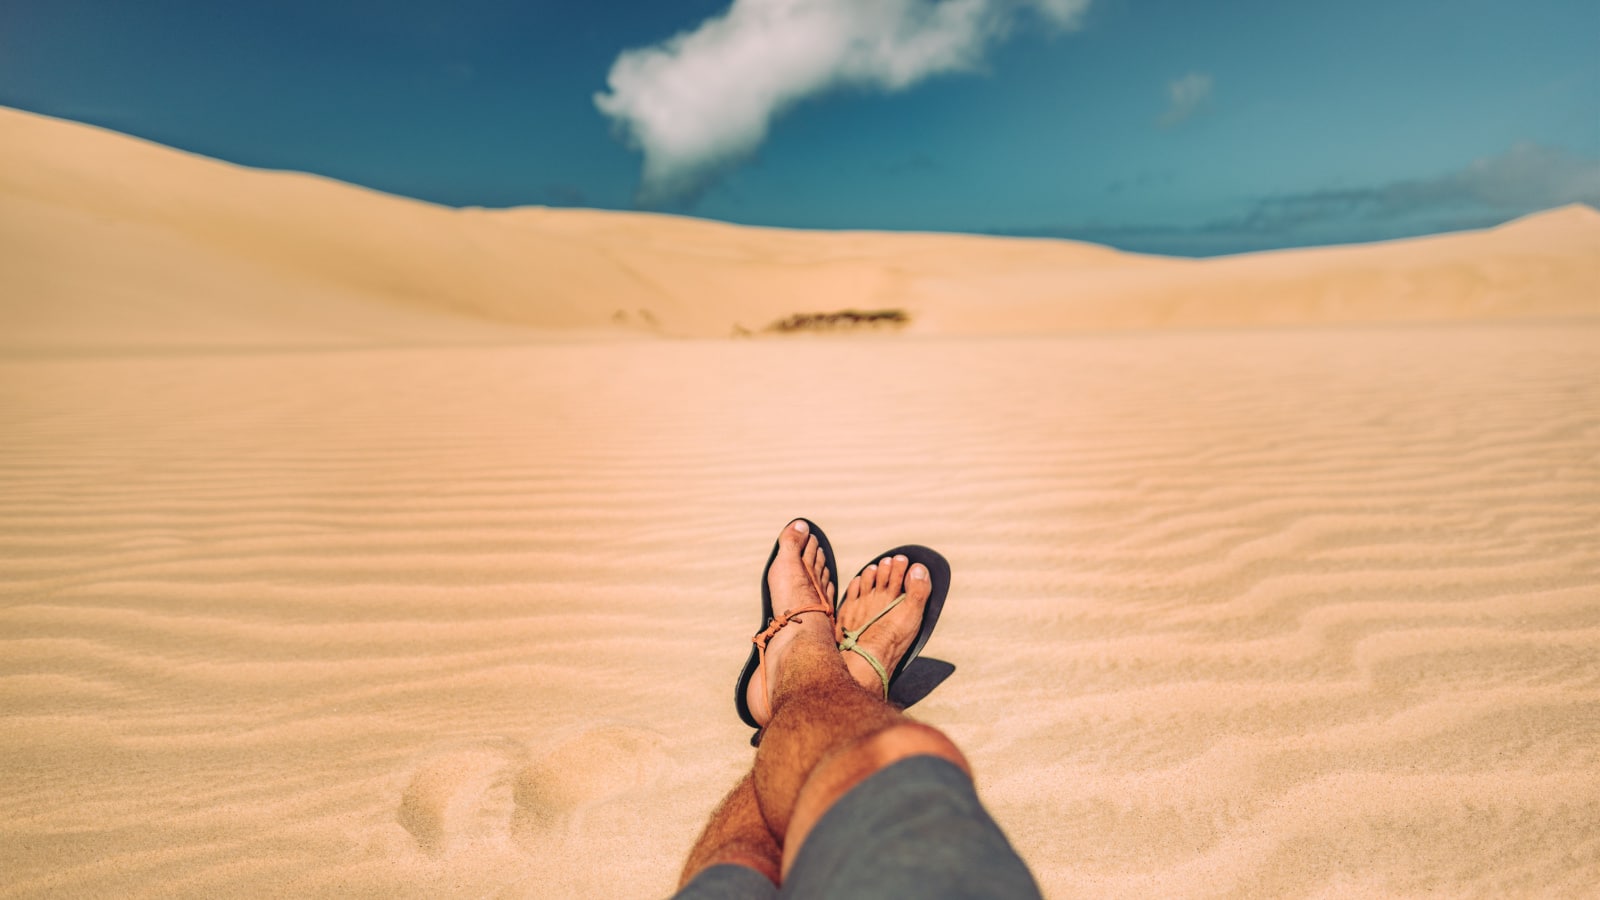 Chill in New Zealand on sand dune Xero Shoes Sandals